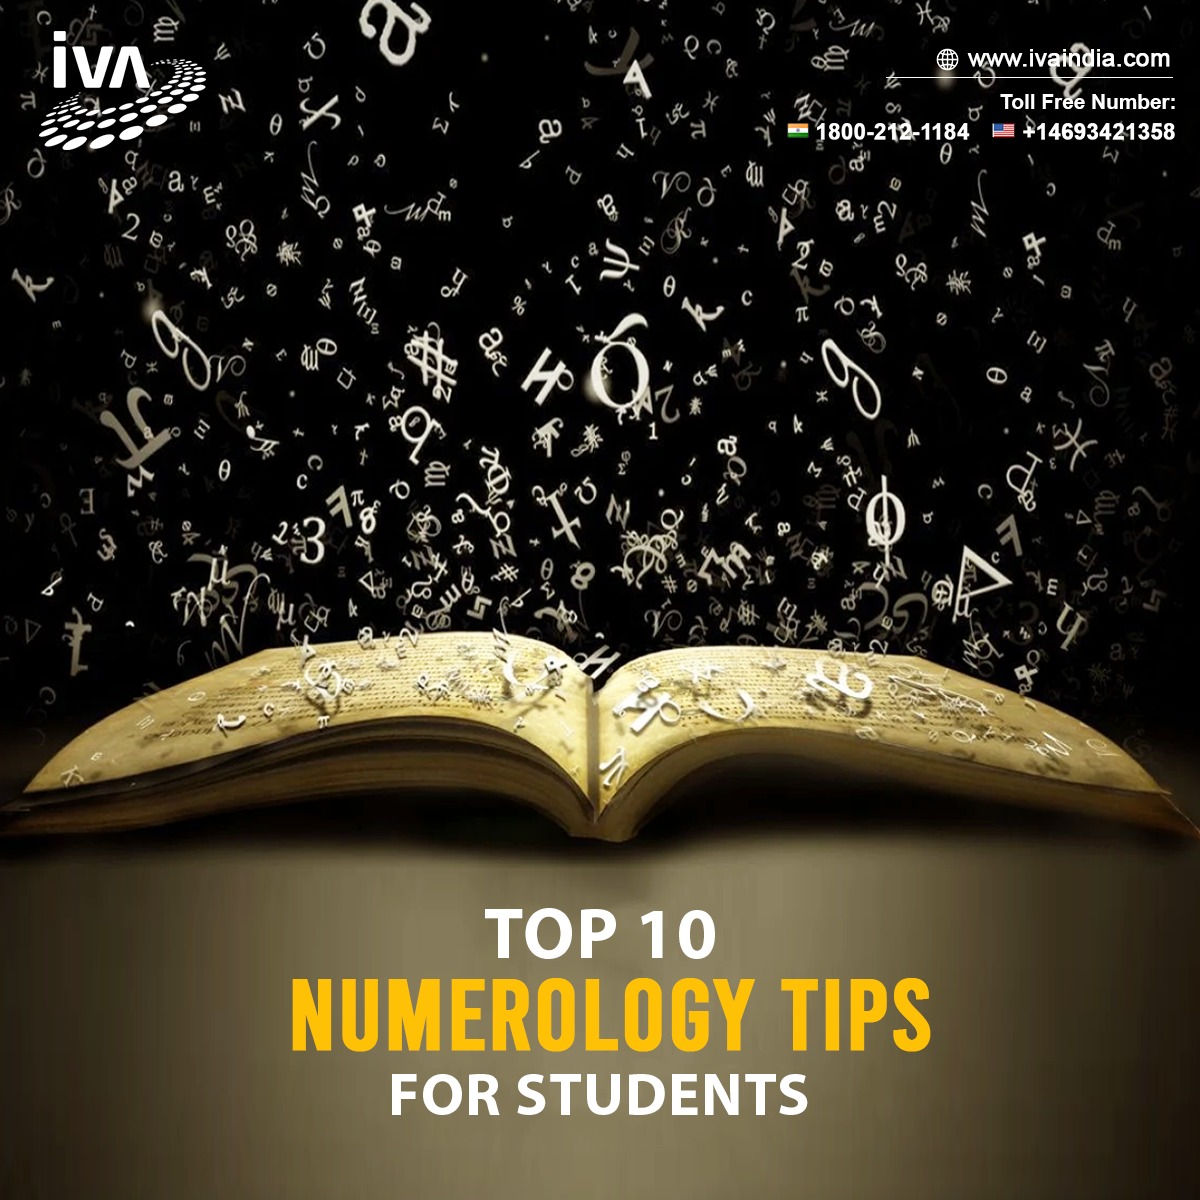 TOP 10 NUMEROLOGY TIPS FOR STUDENTS